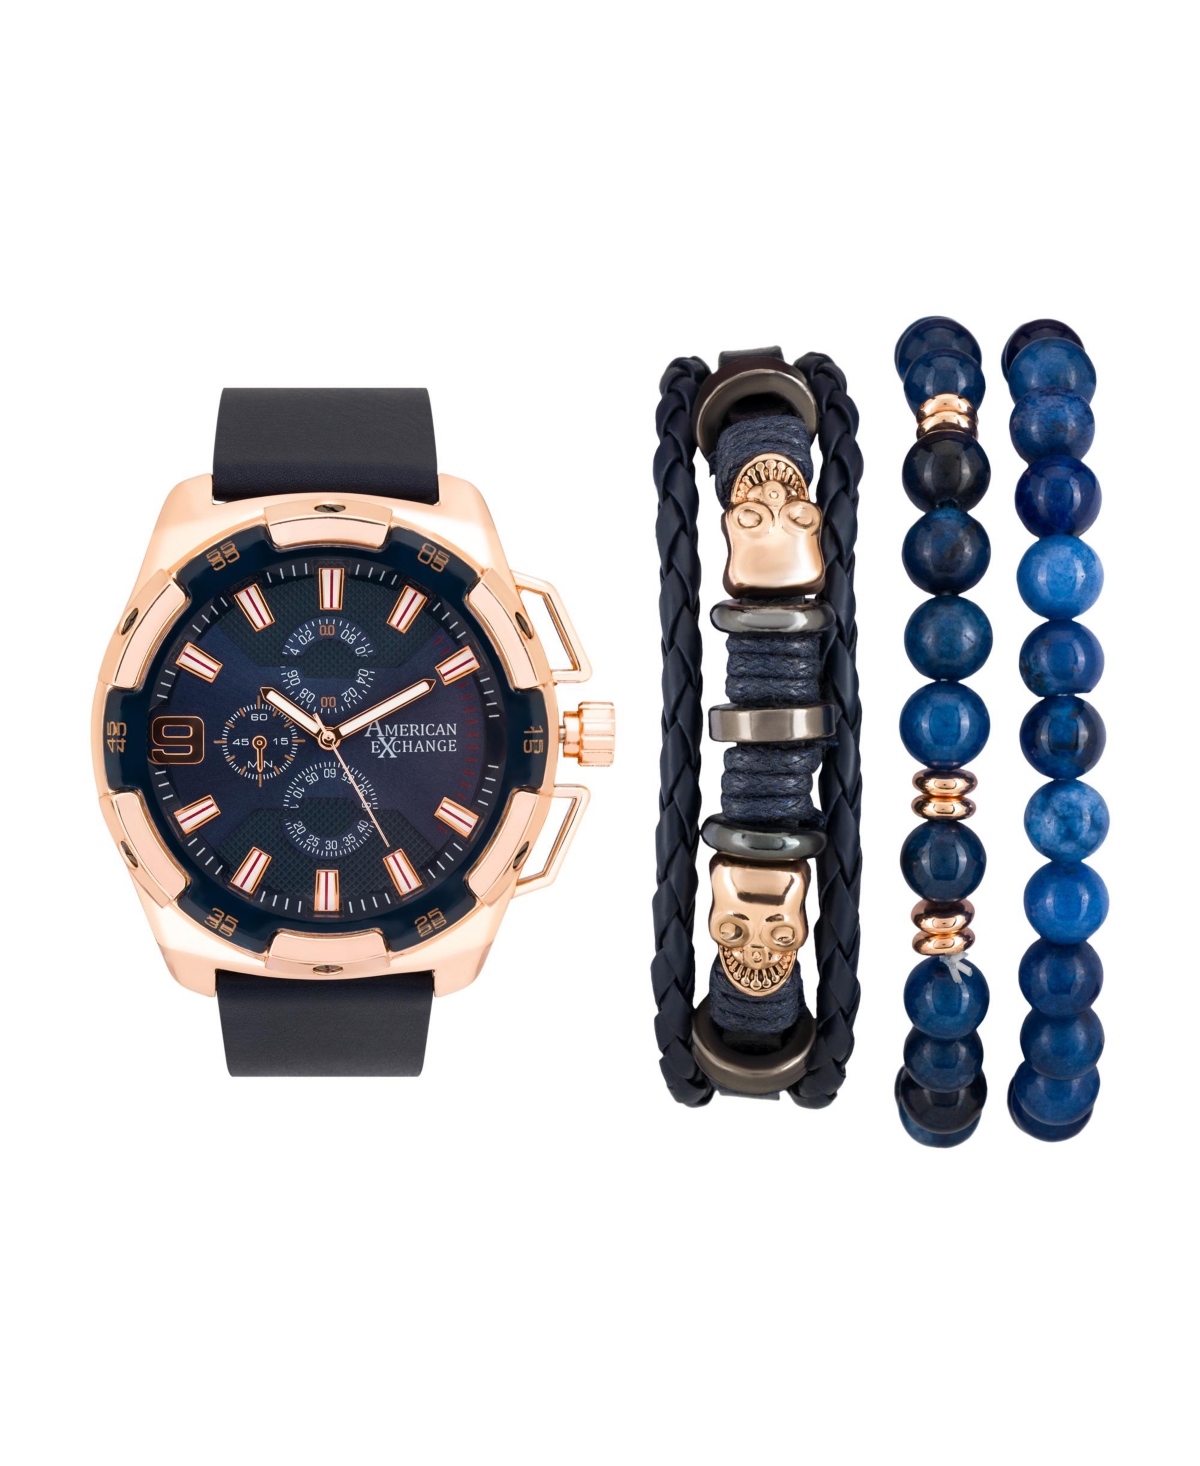 American Exchange Men's Rose Gold/Navy Analog Quartz Watch And Holiday Stackable Gift Set